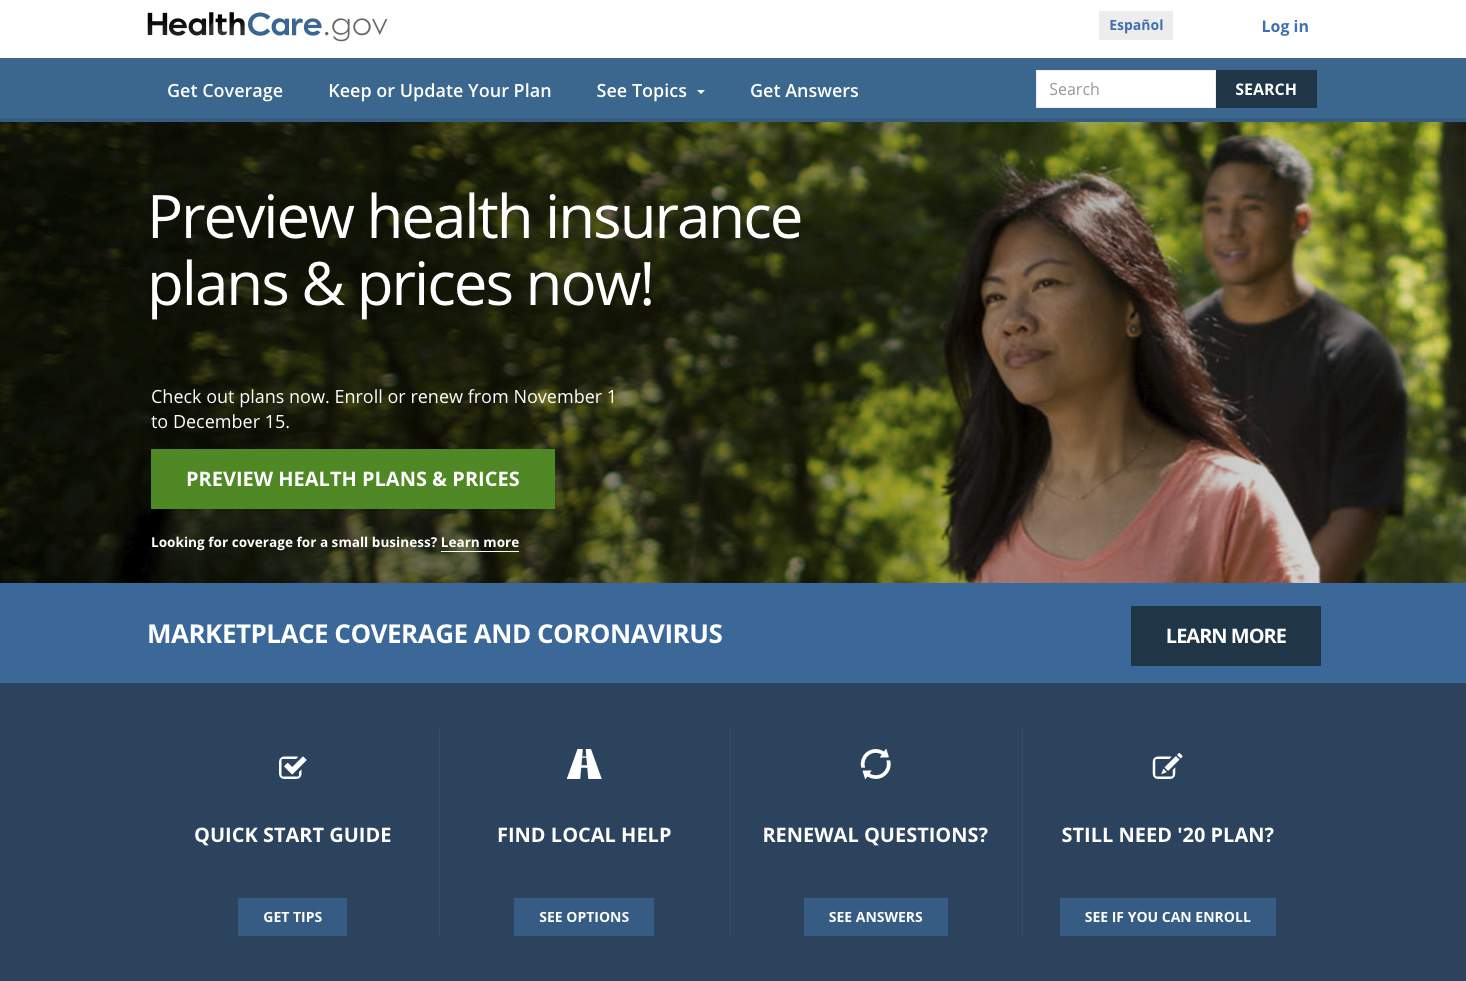 Can You Enroll In Health Insurance Now : Getcoverednj - Then, only the